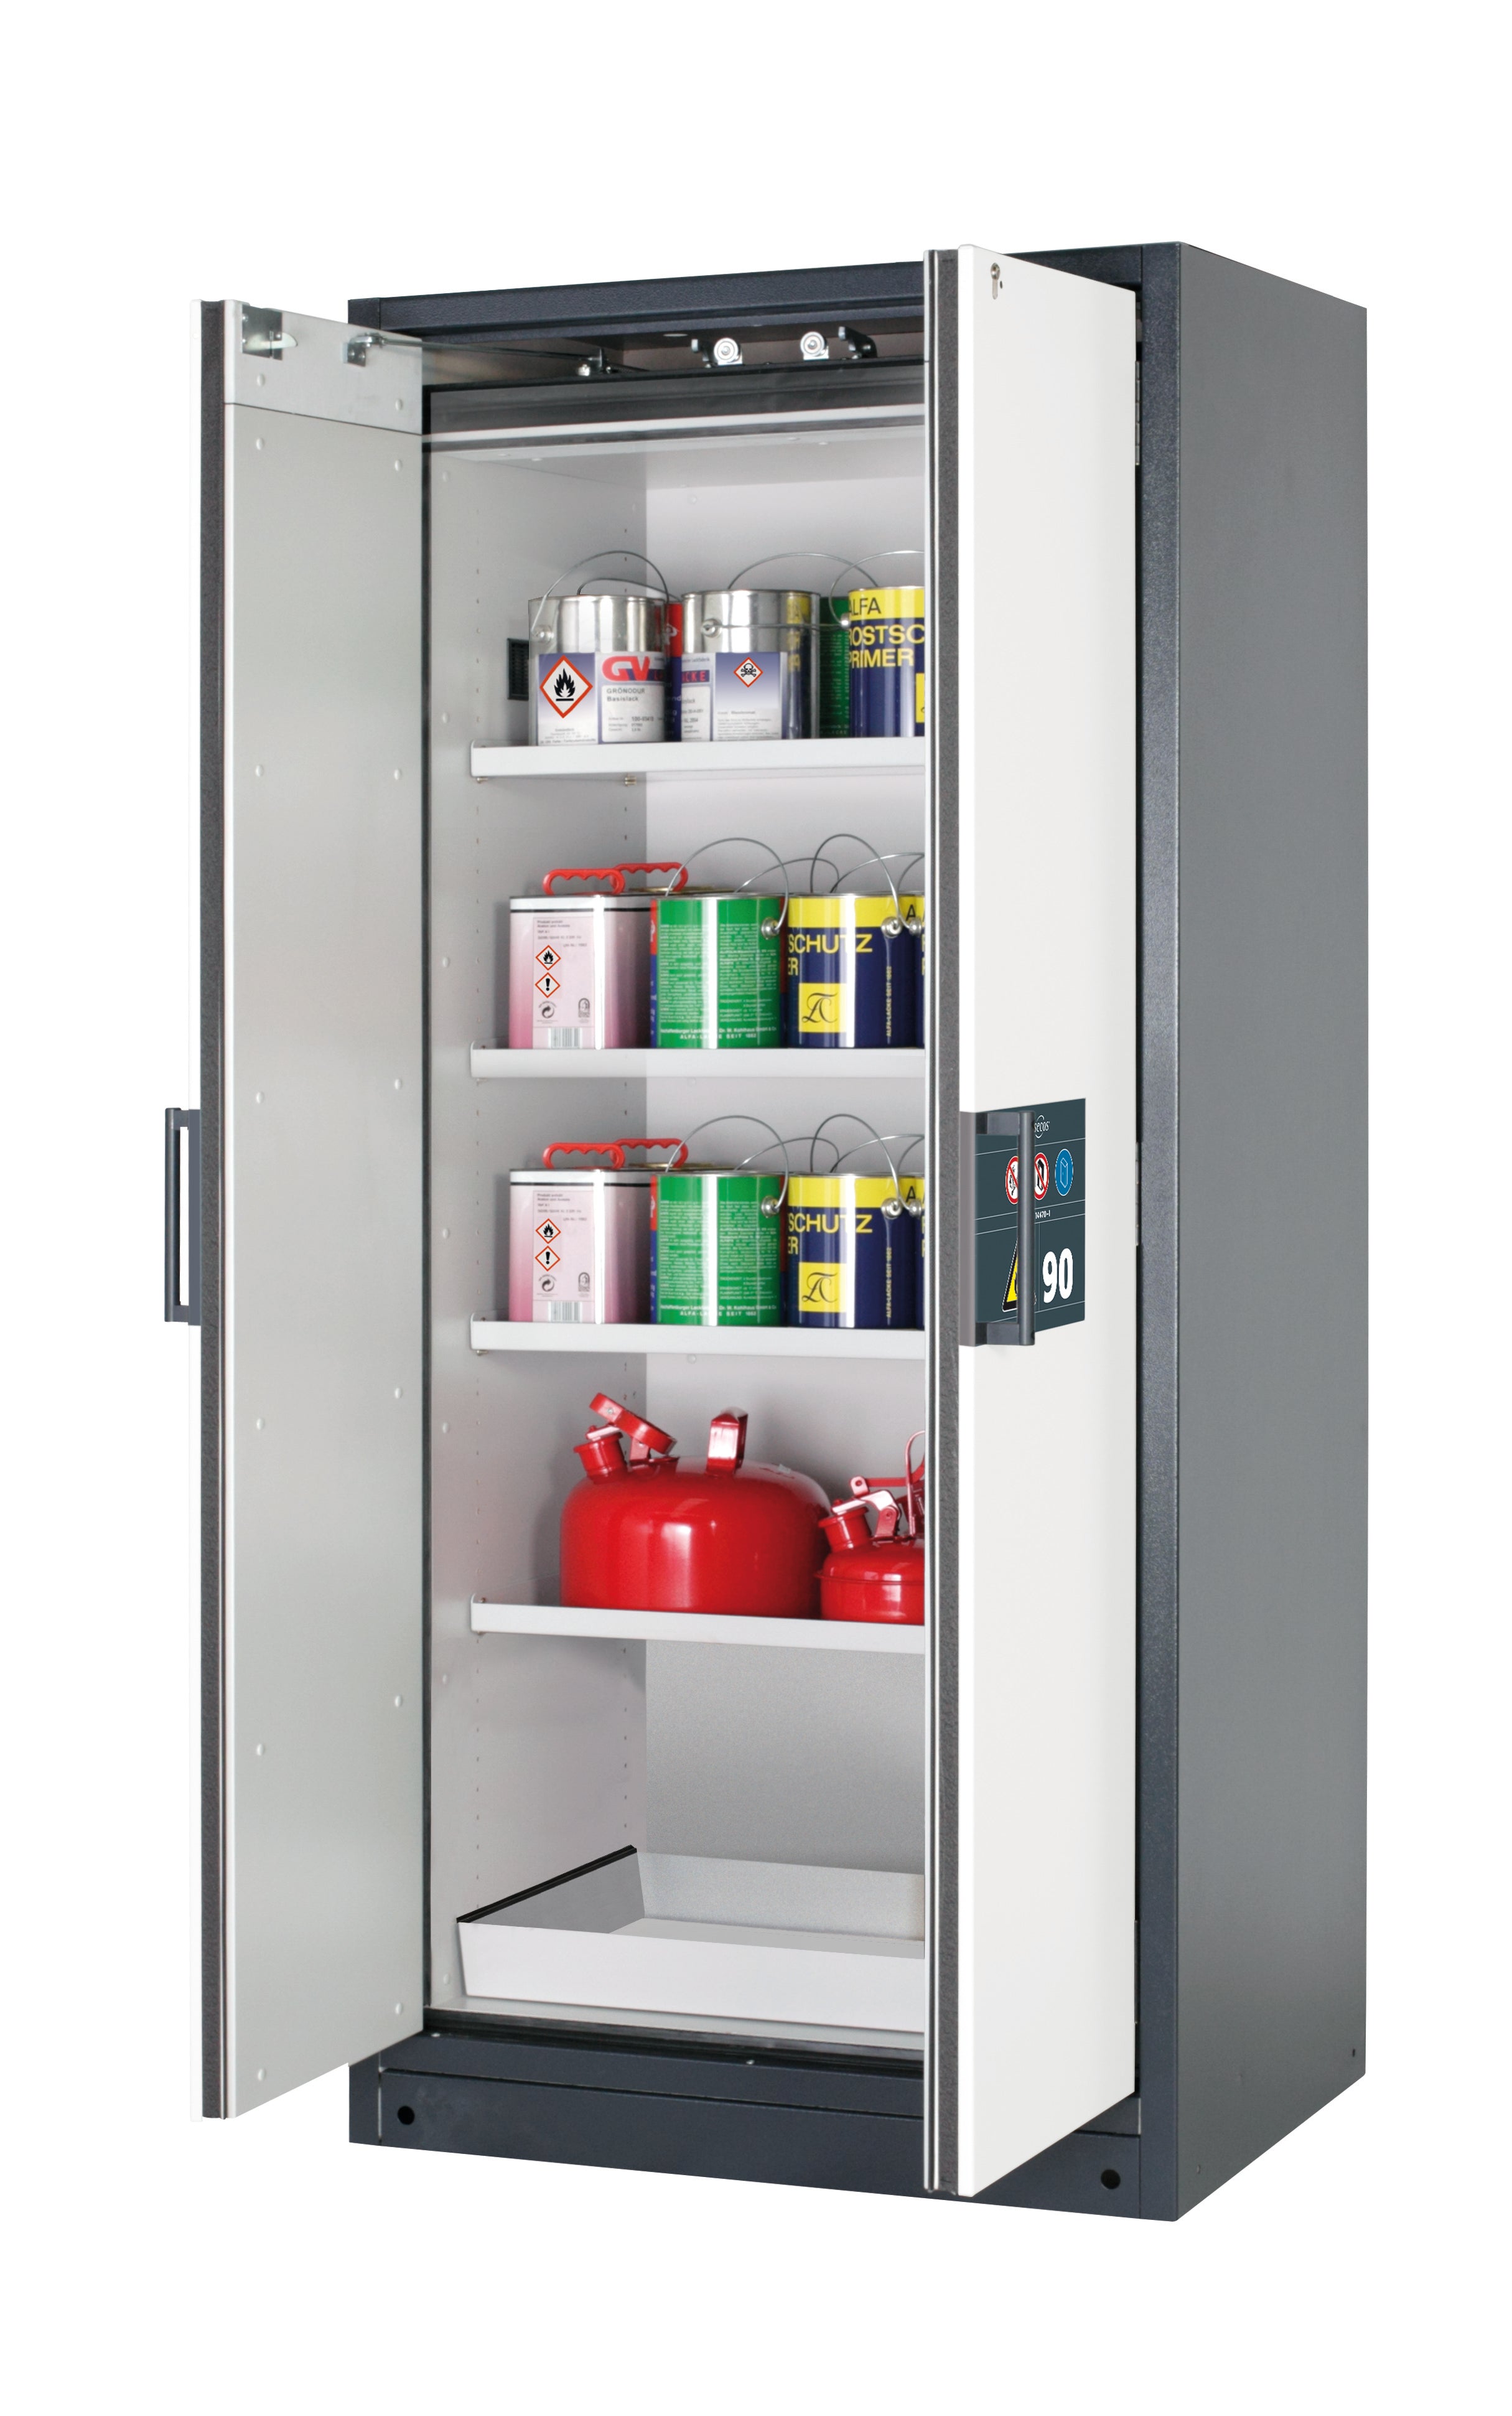 Type 90 safety storage cabinet Q-CLASSIC-90 model Q90.195.090 in pure white RAL 9010 with 4x shelf standard (sheet steel),